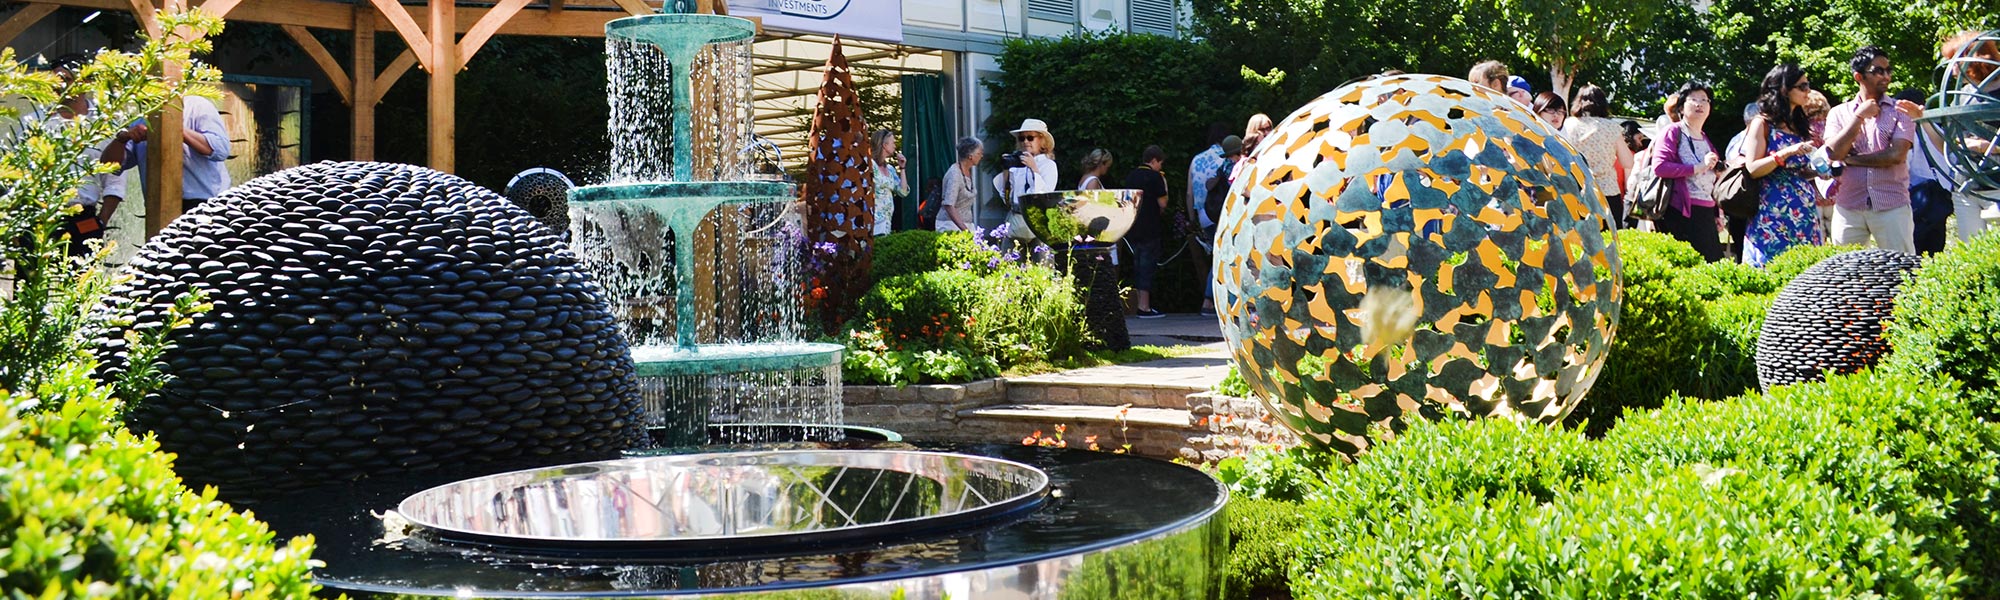 Tour Rhs Chelsea Flower Show 2019 Just Go Holidays 8658